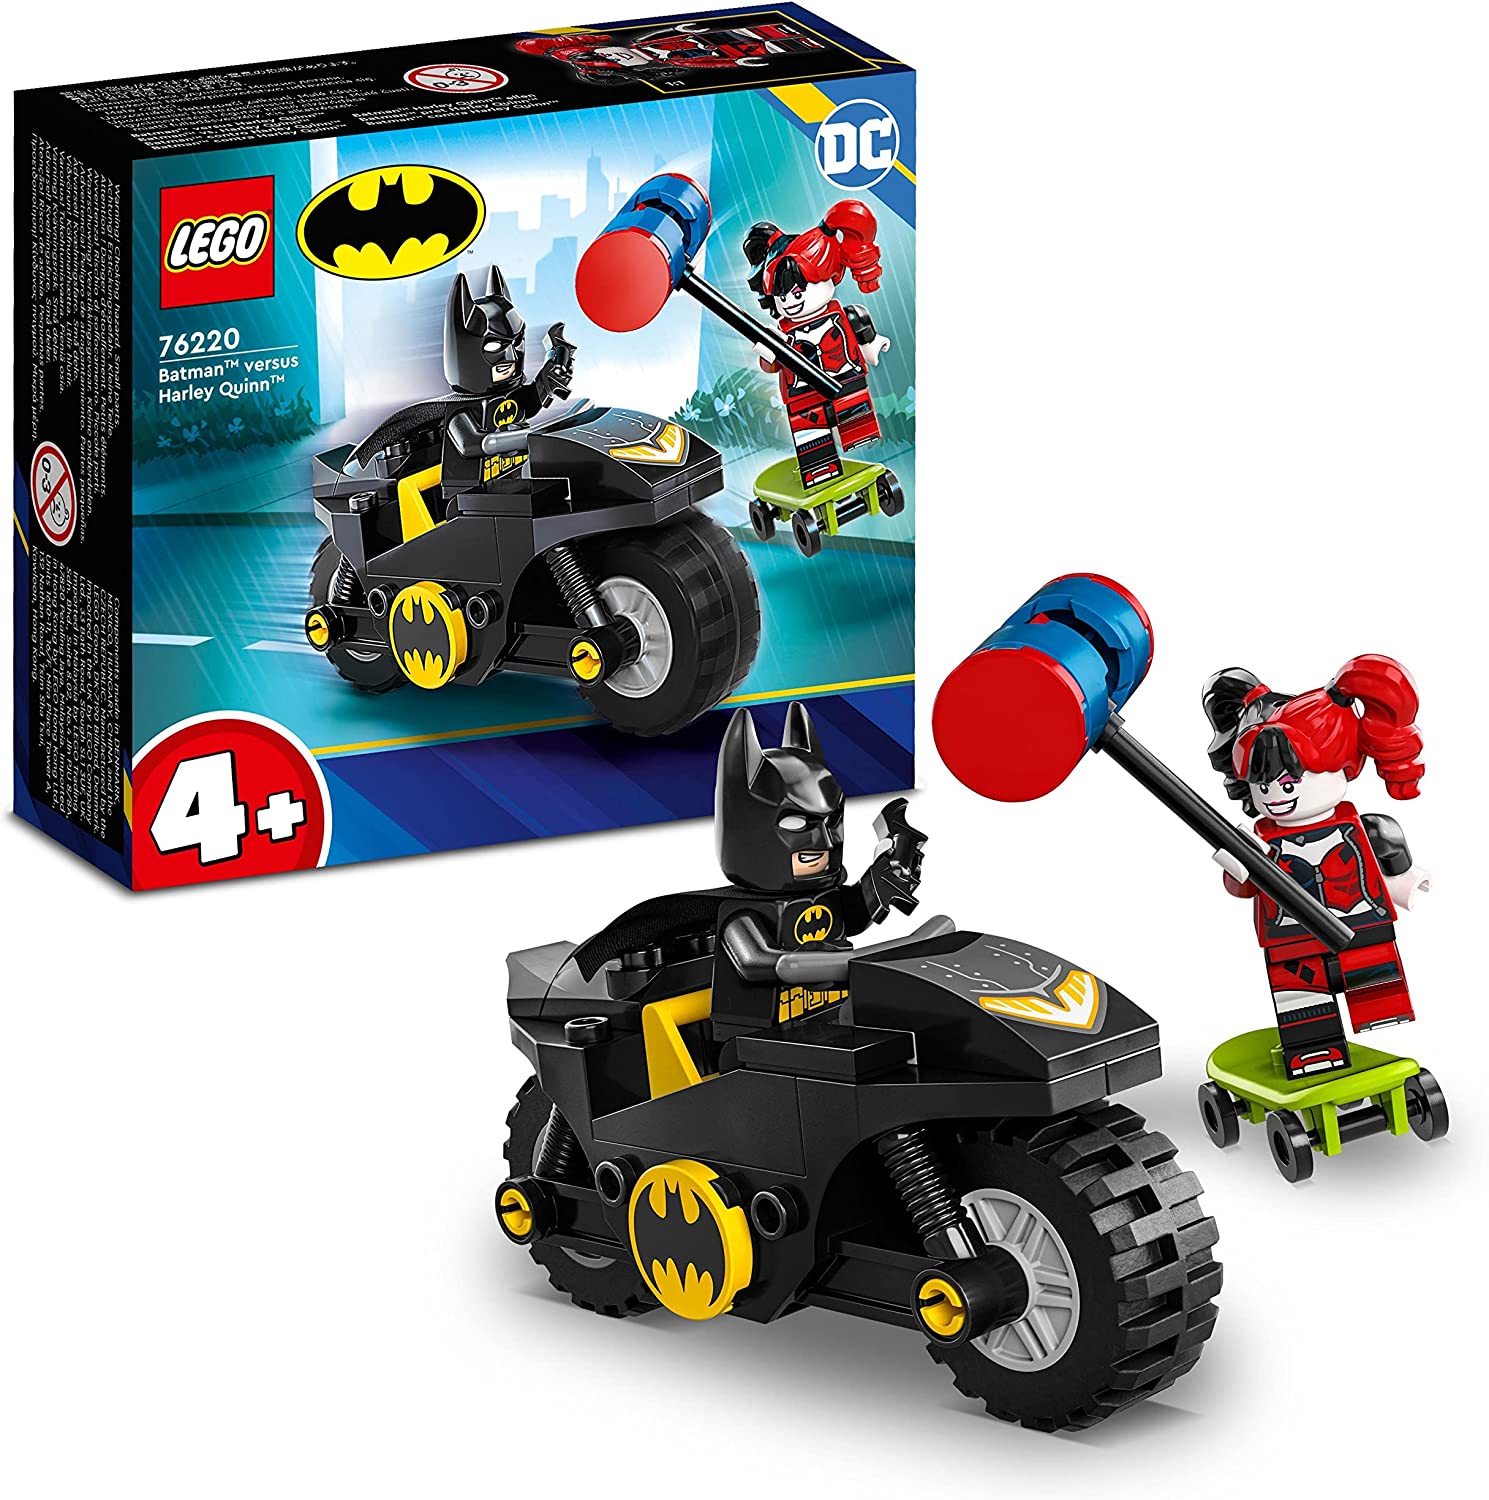 LEGO 76220 DC Batman vs. Harley Quinn Superhero Set with Action Figures, Skateboard and Motorcycle Toys for Boys and Girls from 4 Years